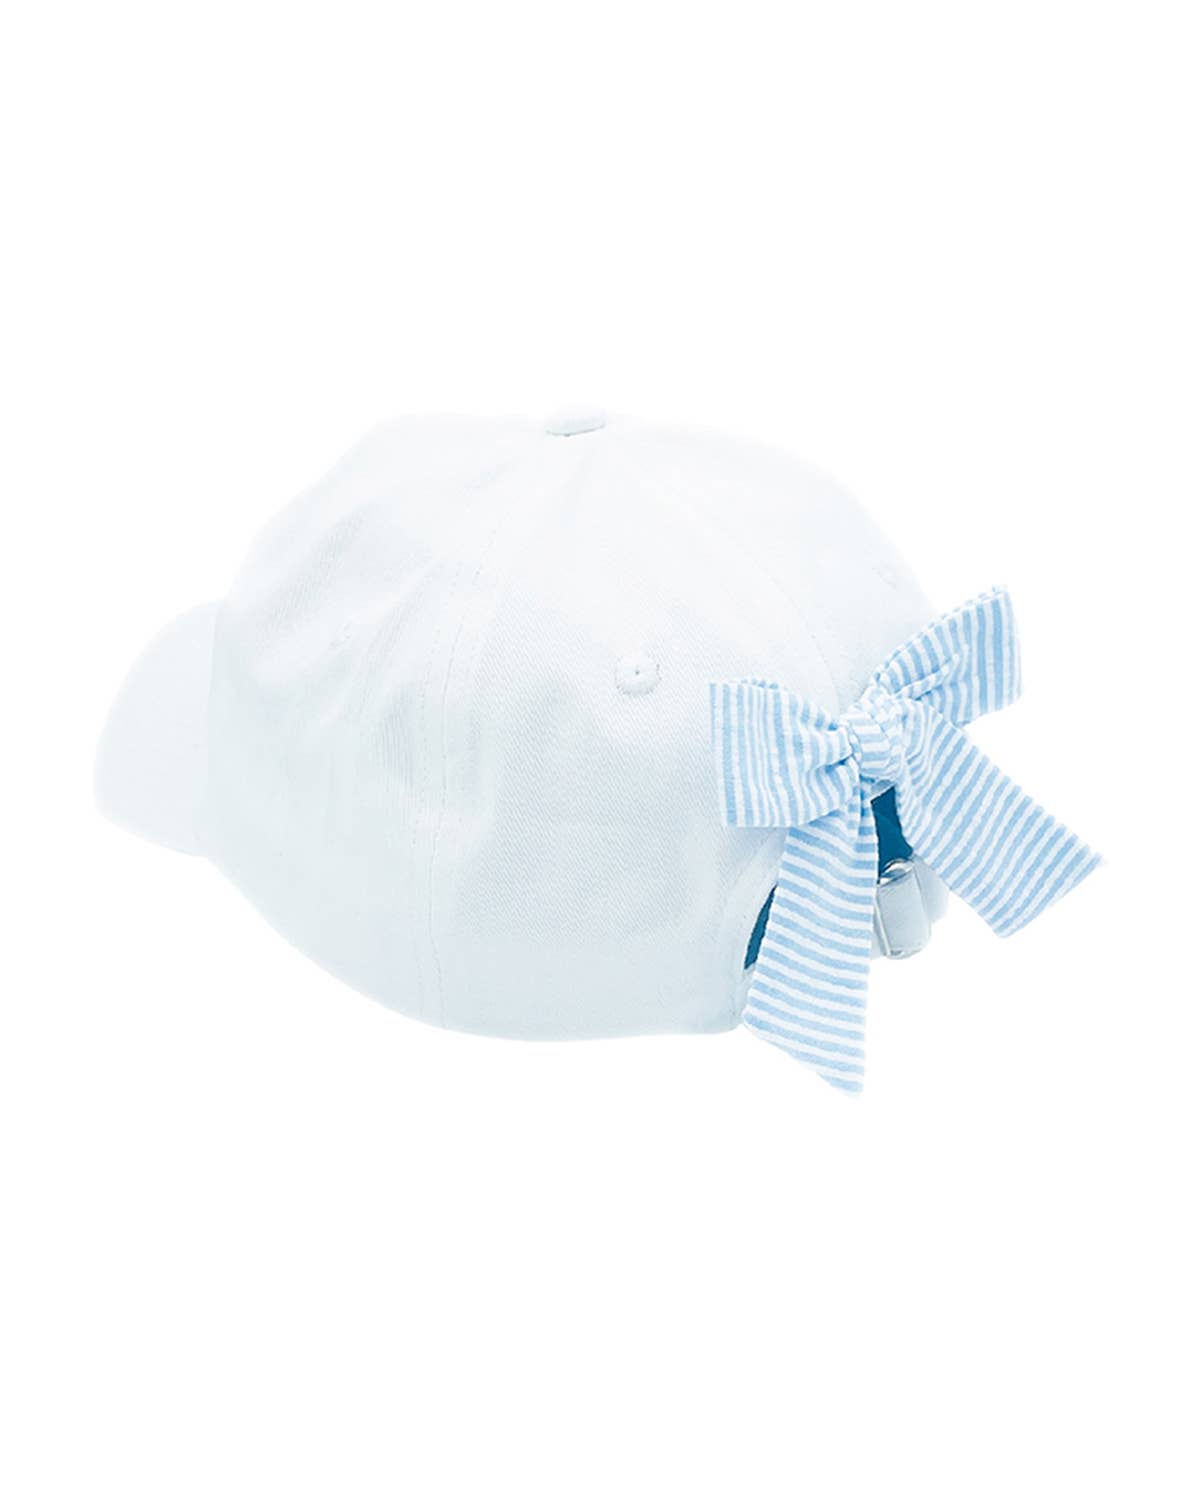 Bow Baseball Hat in Winnie White ages 12+